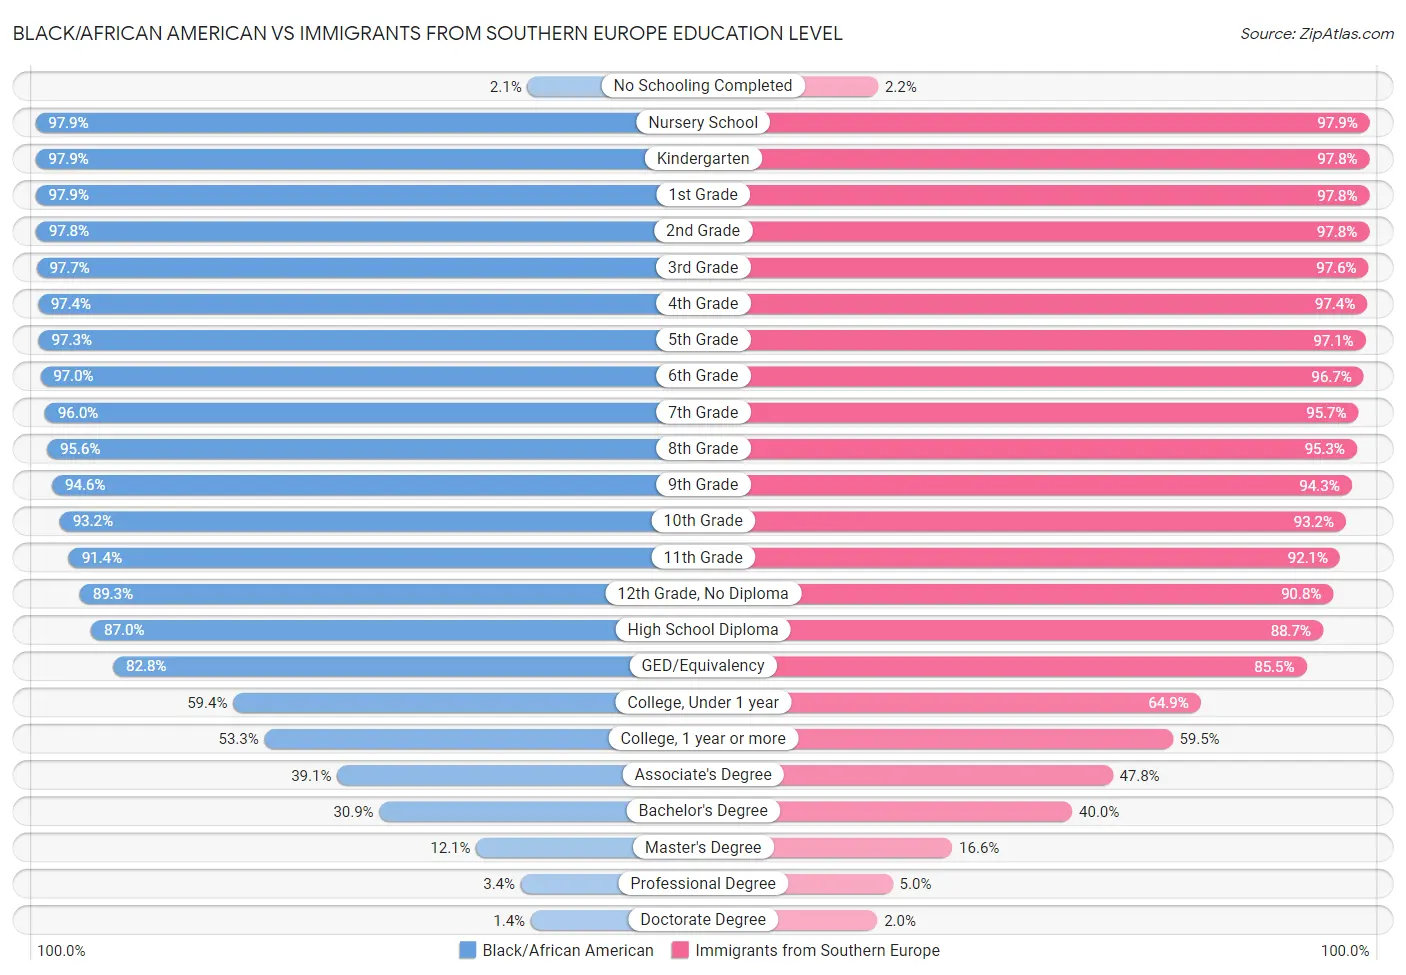 Black/African American vs Immigrants from Southern Europe Education Level